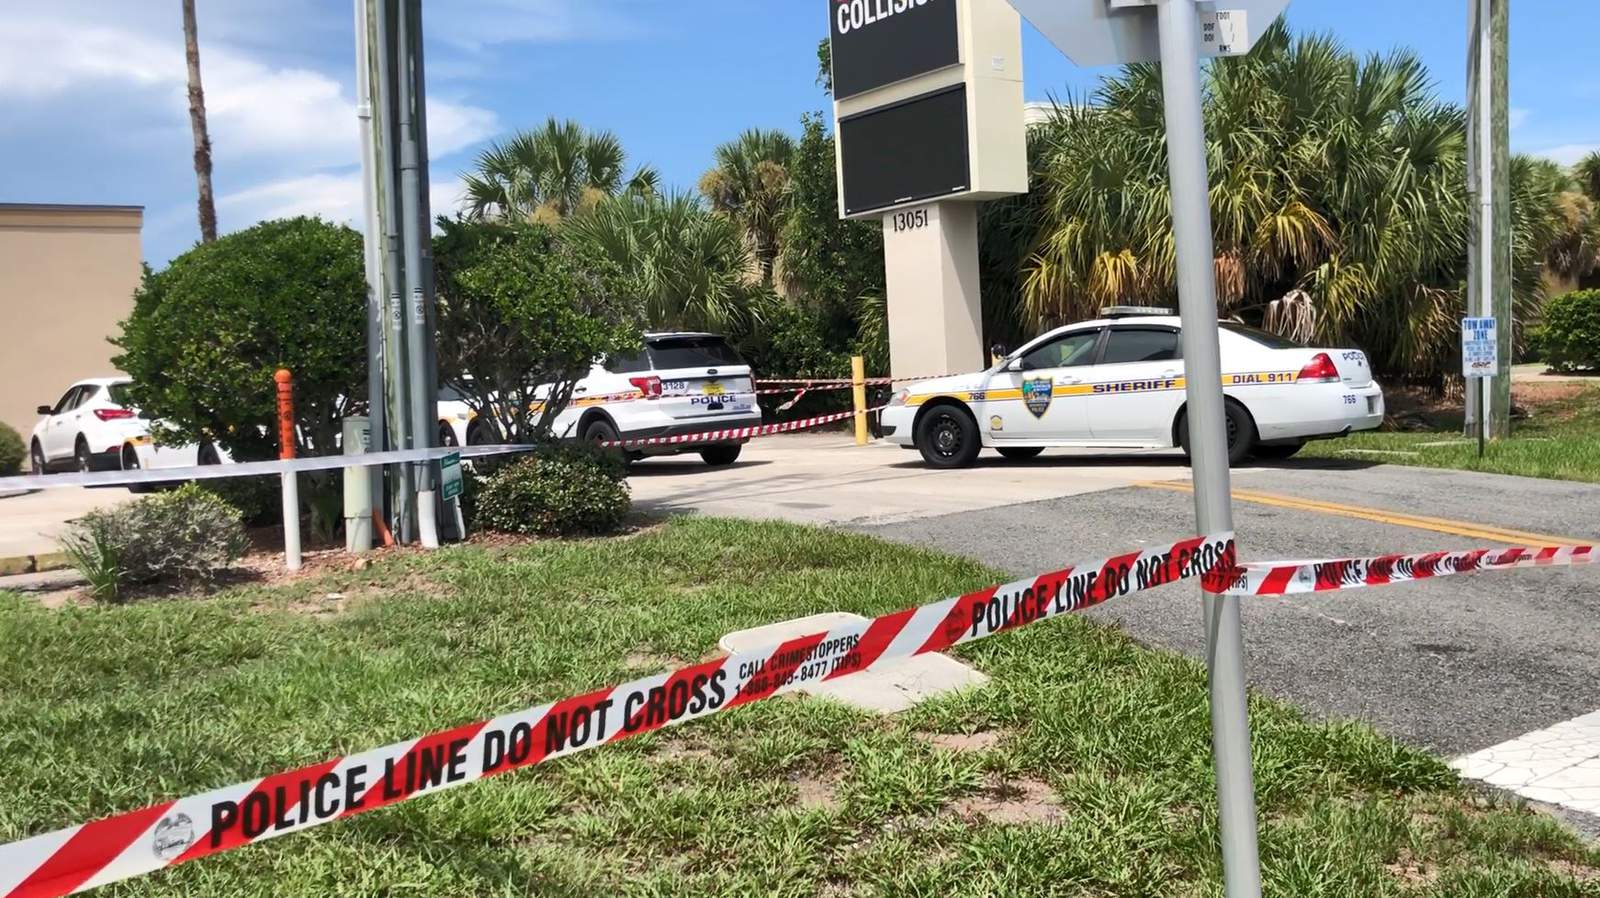 Jacksonville police respond to reported crime, man dies at hospital